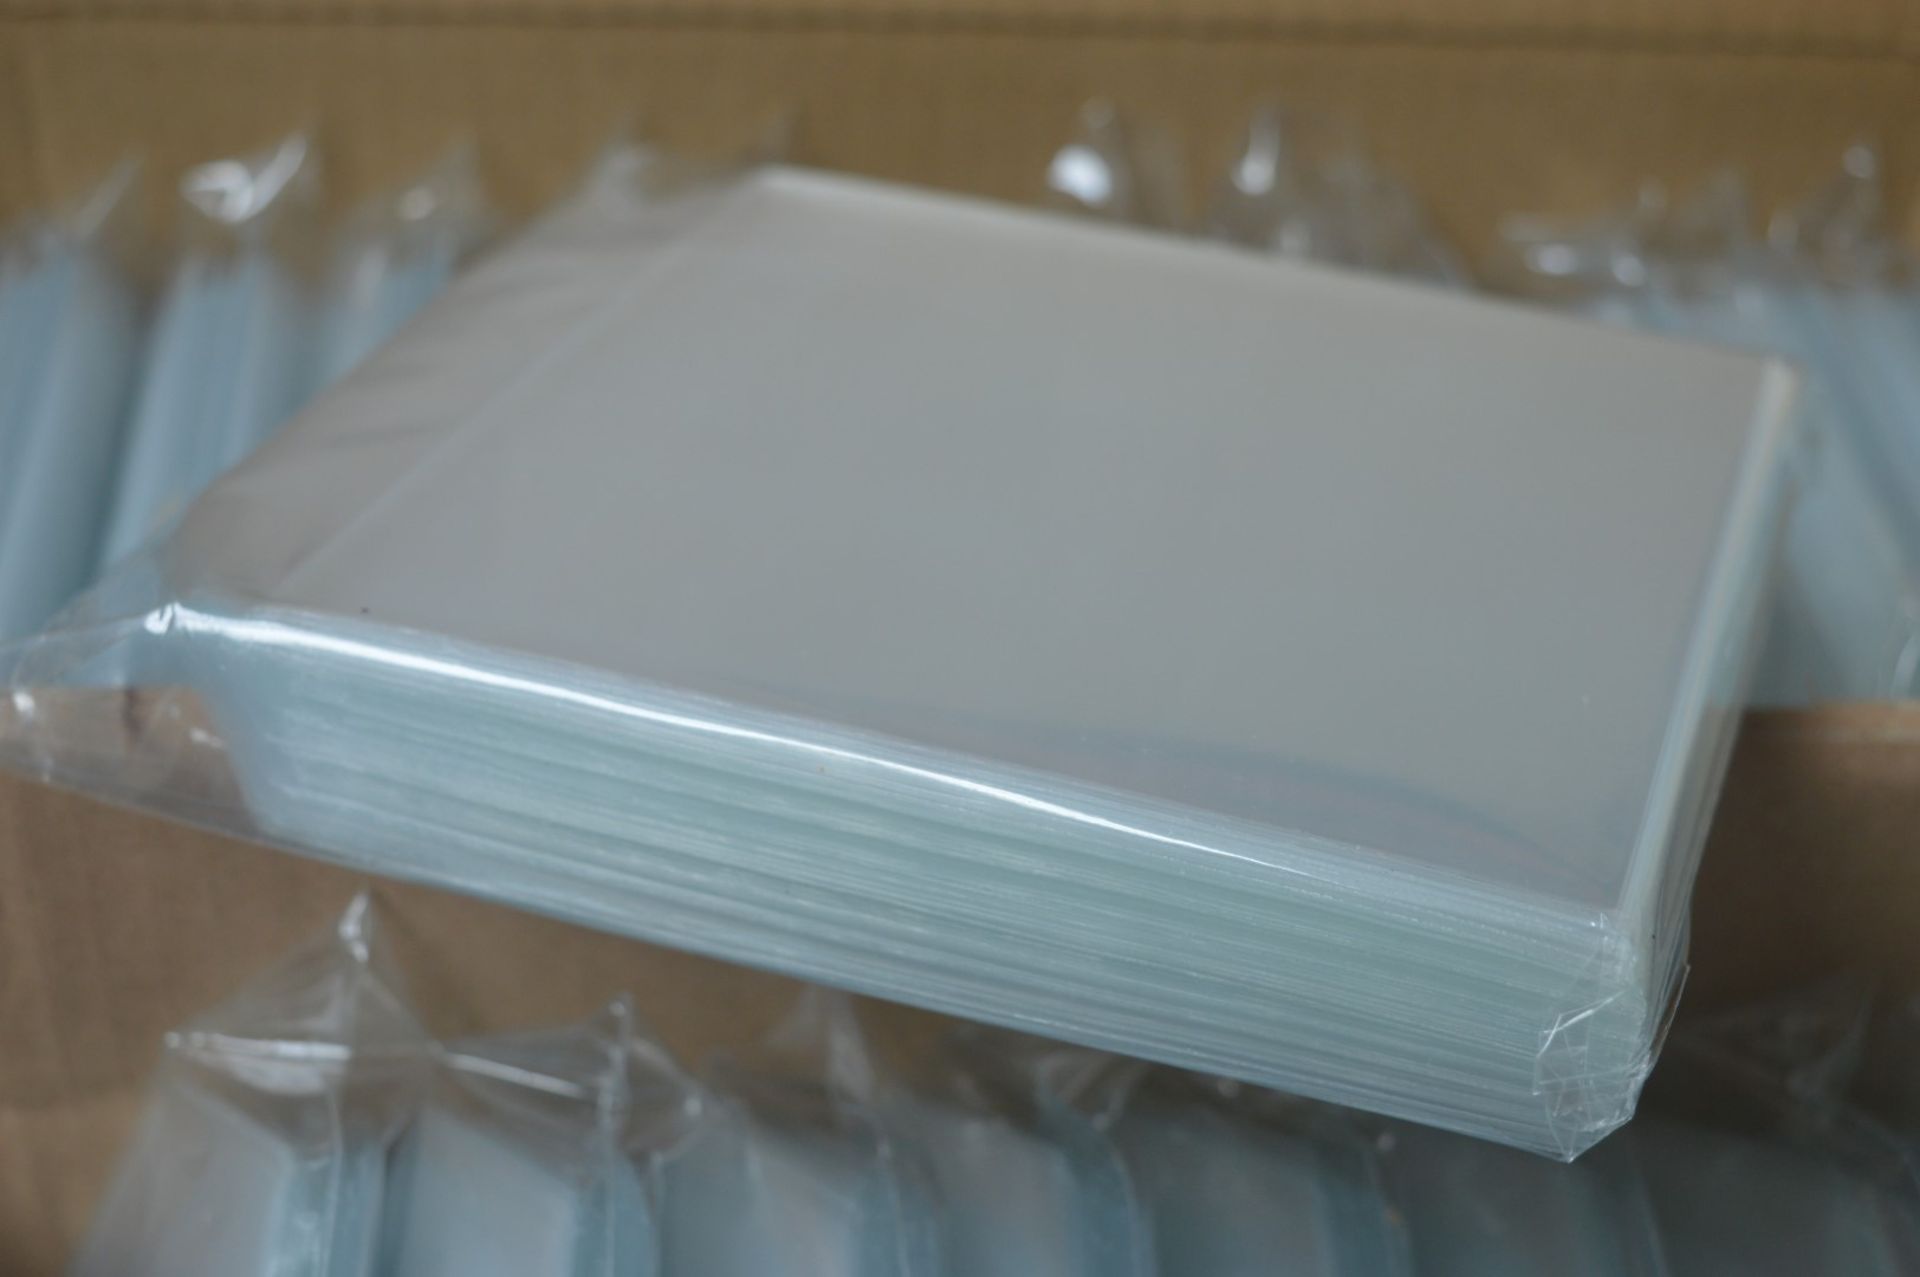 800 x Clear Plastic CD or DVD Sleeves With Flaps - Includes 8 x Packs of 100 Sleeves - Brand New - Image 2 of 2